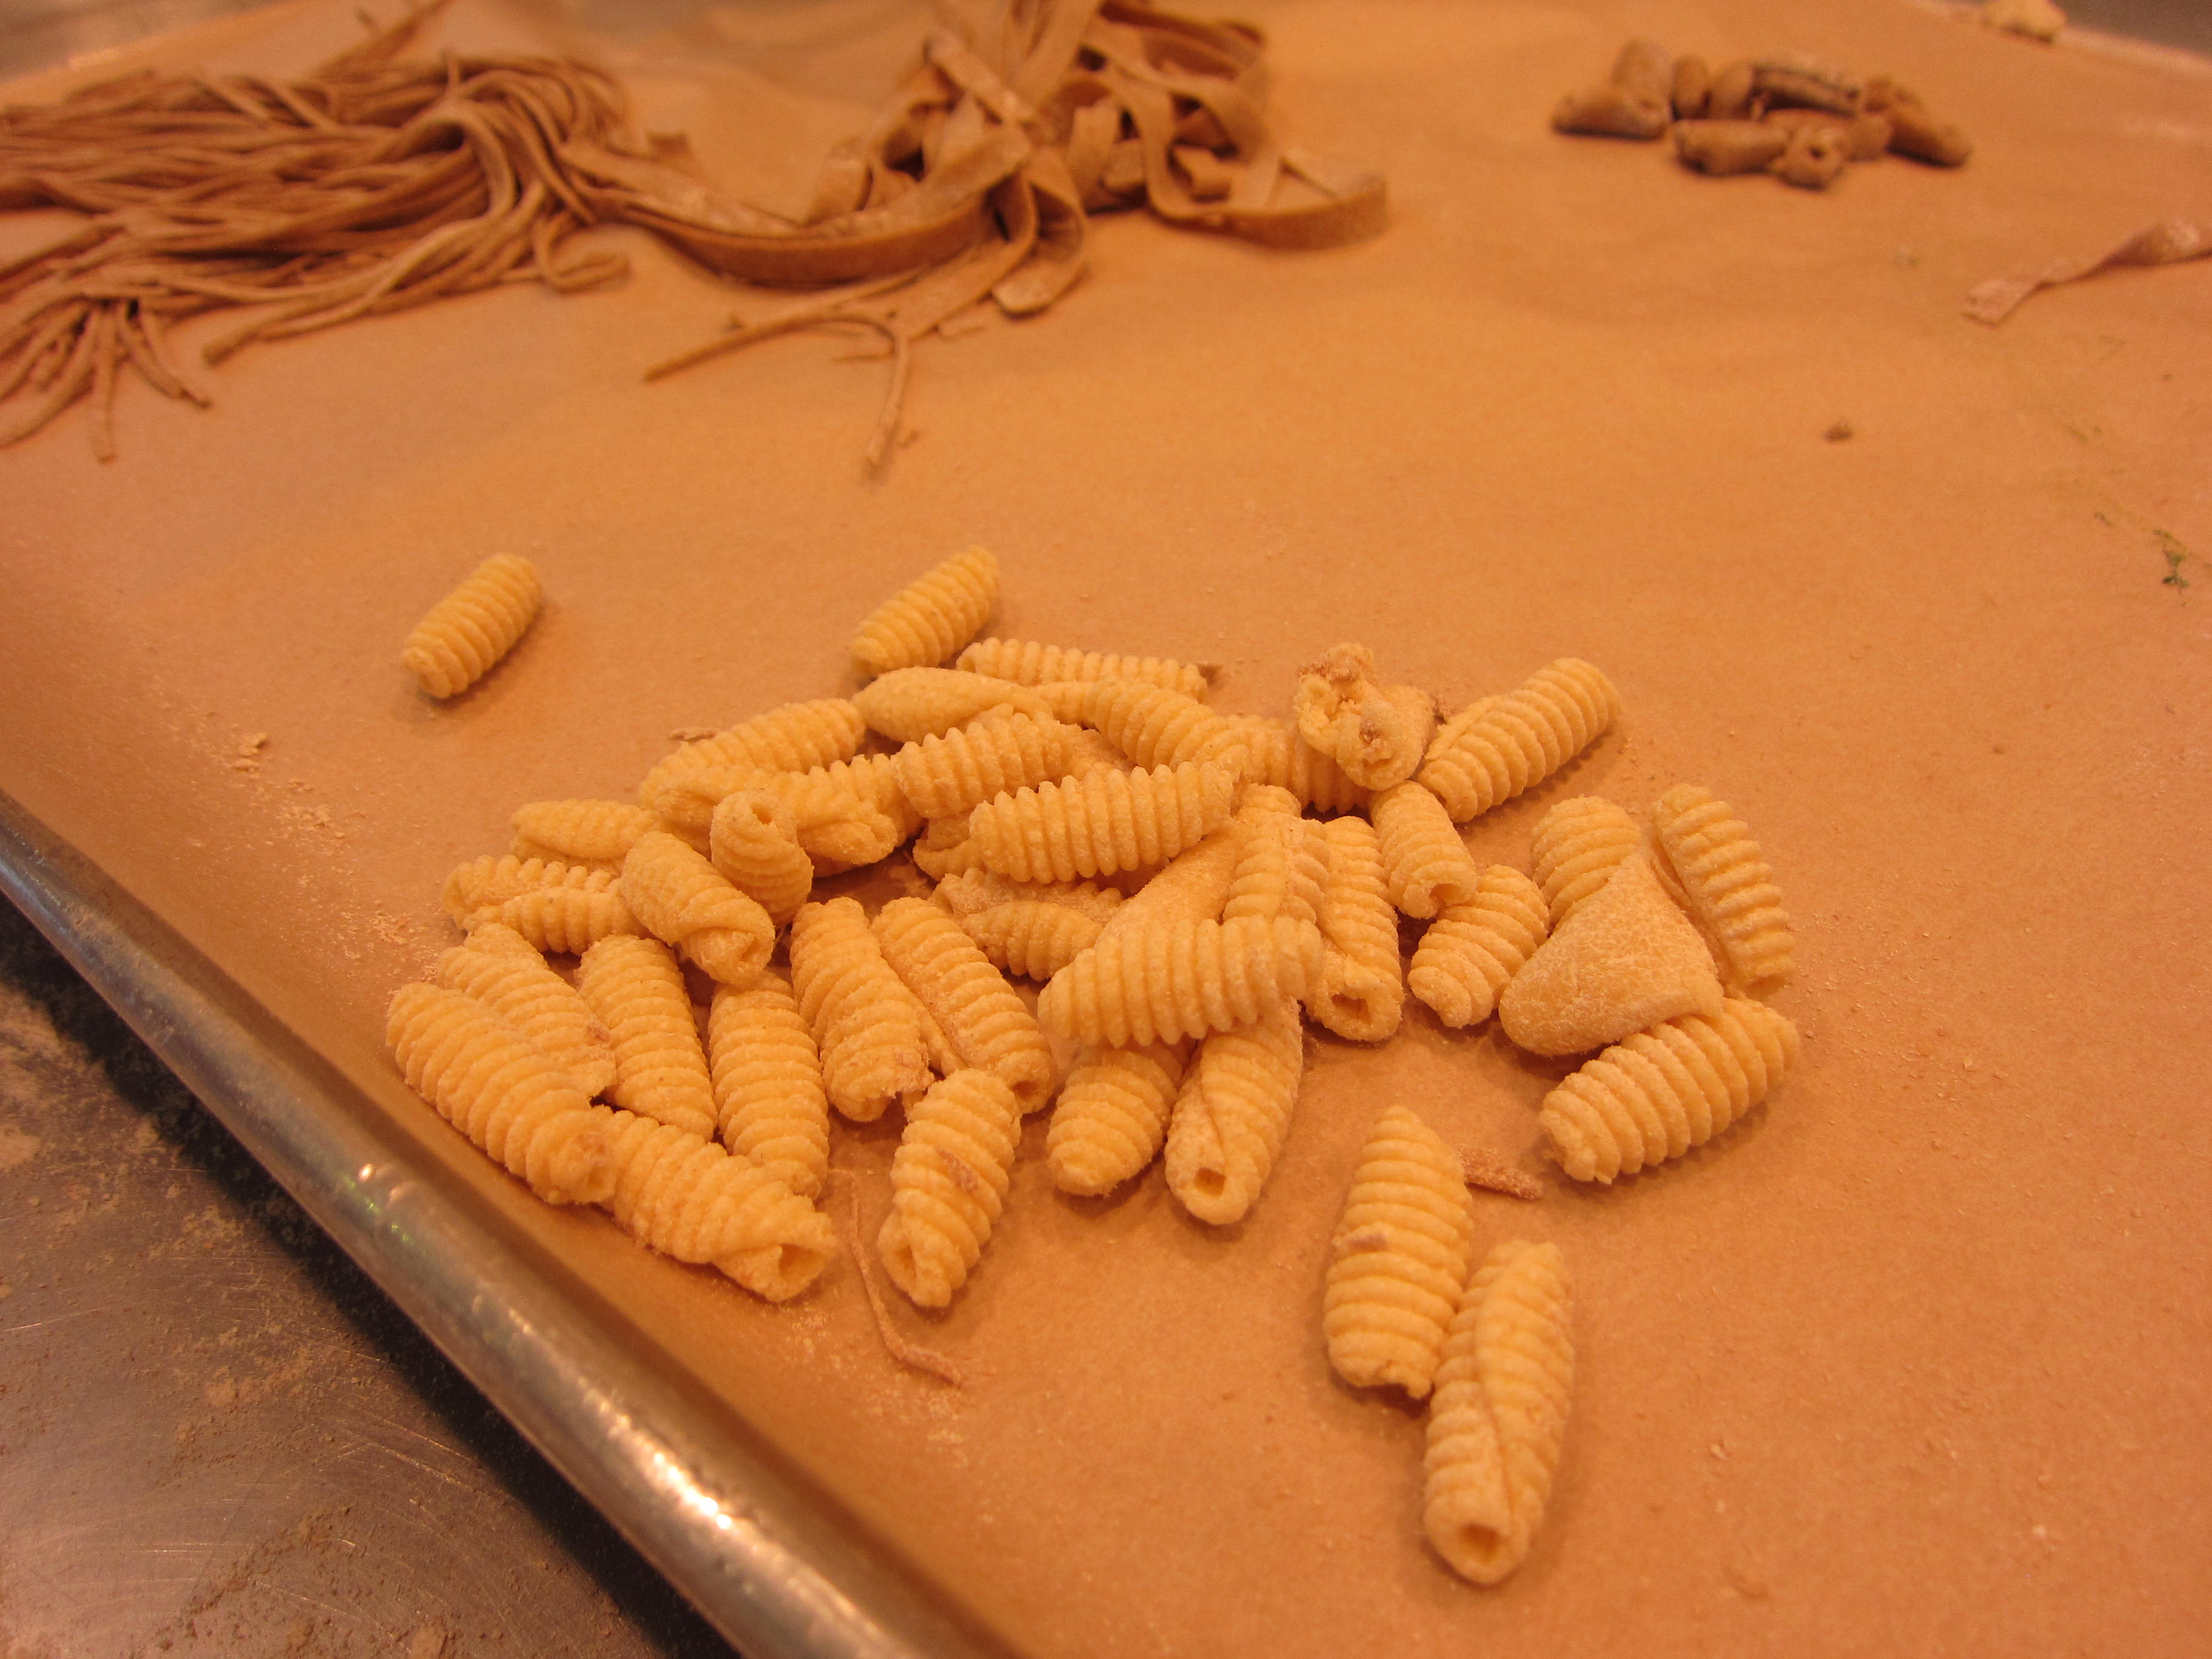 Two different grains used to make pasta that day. We will be trying this with our home-grown Sonora White.